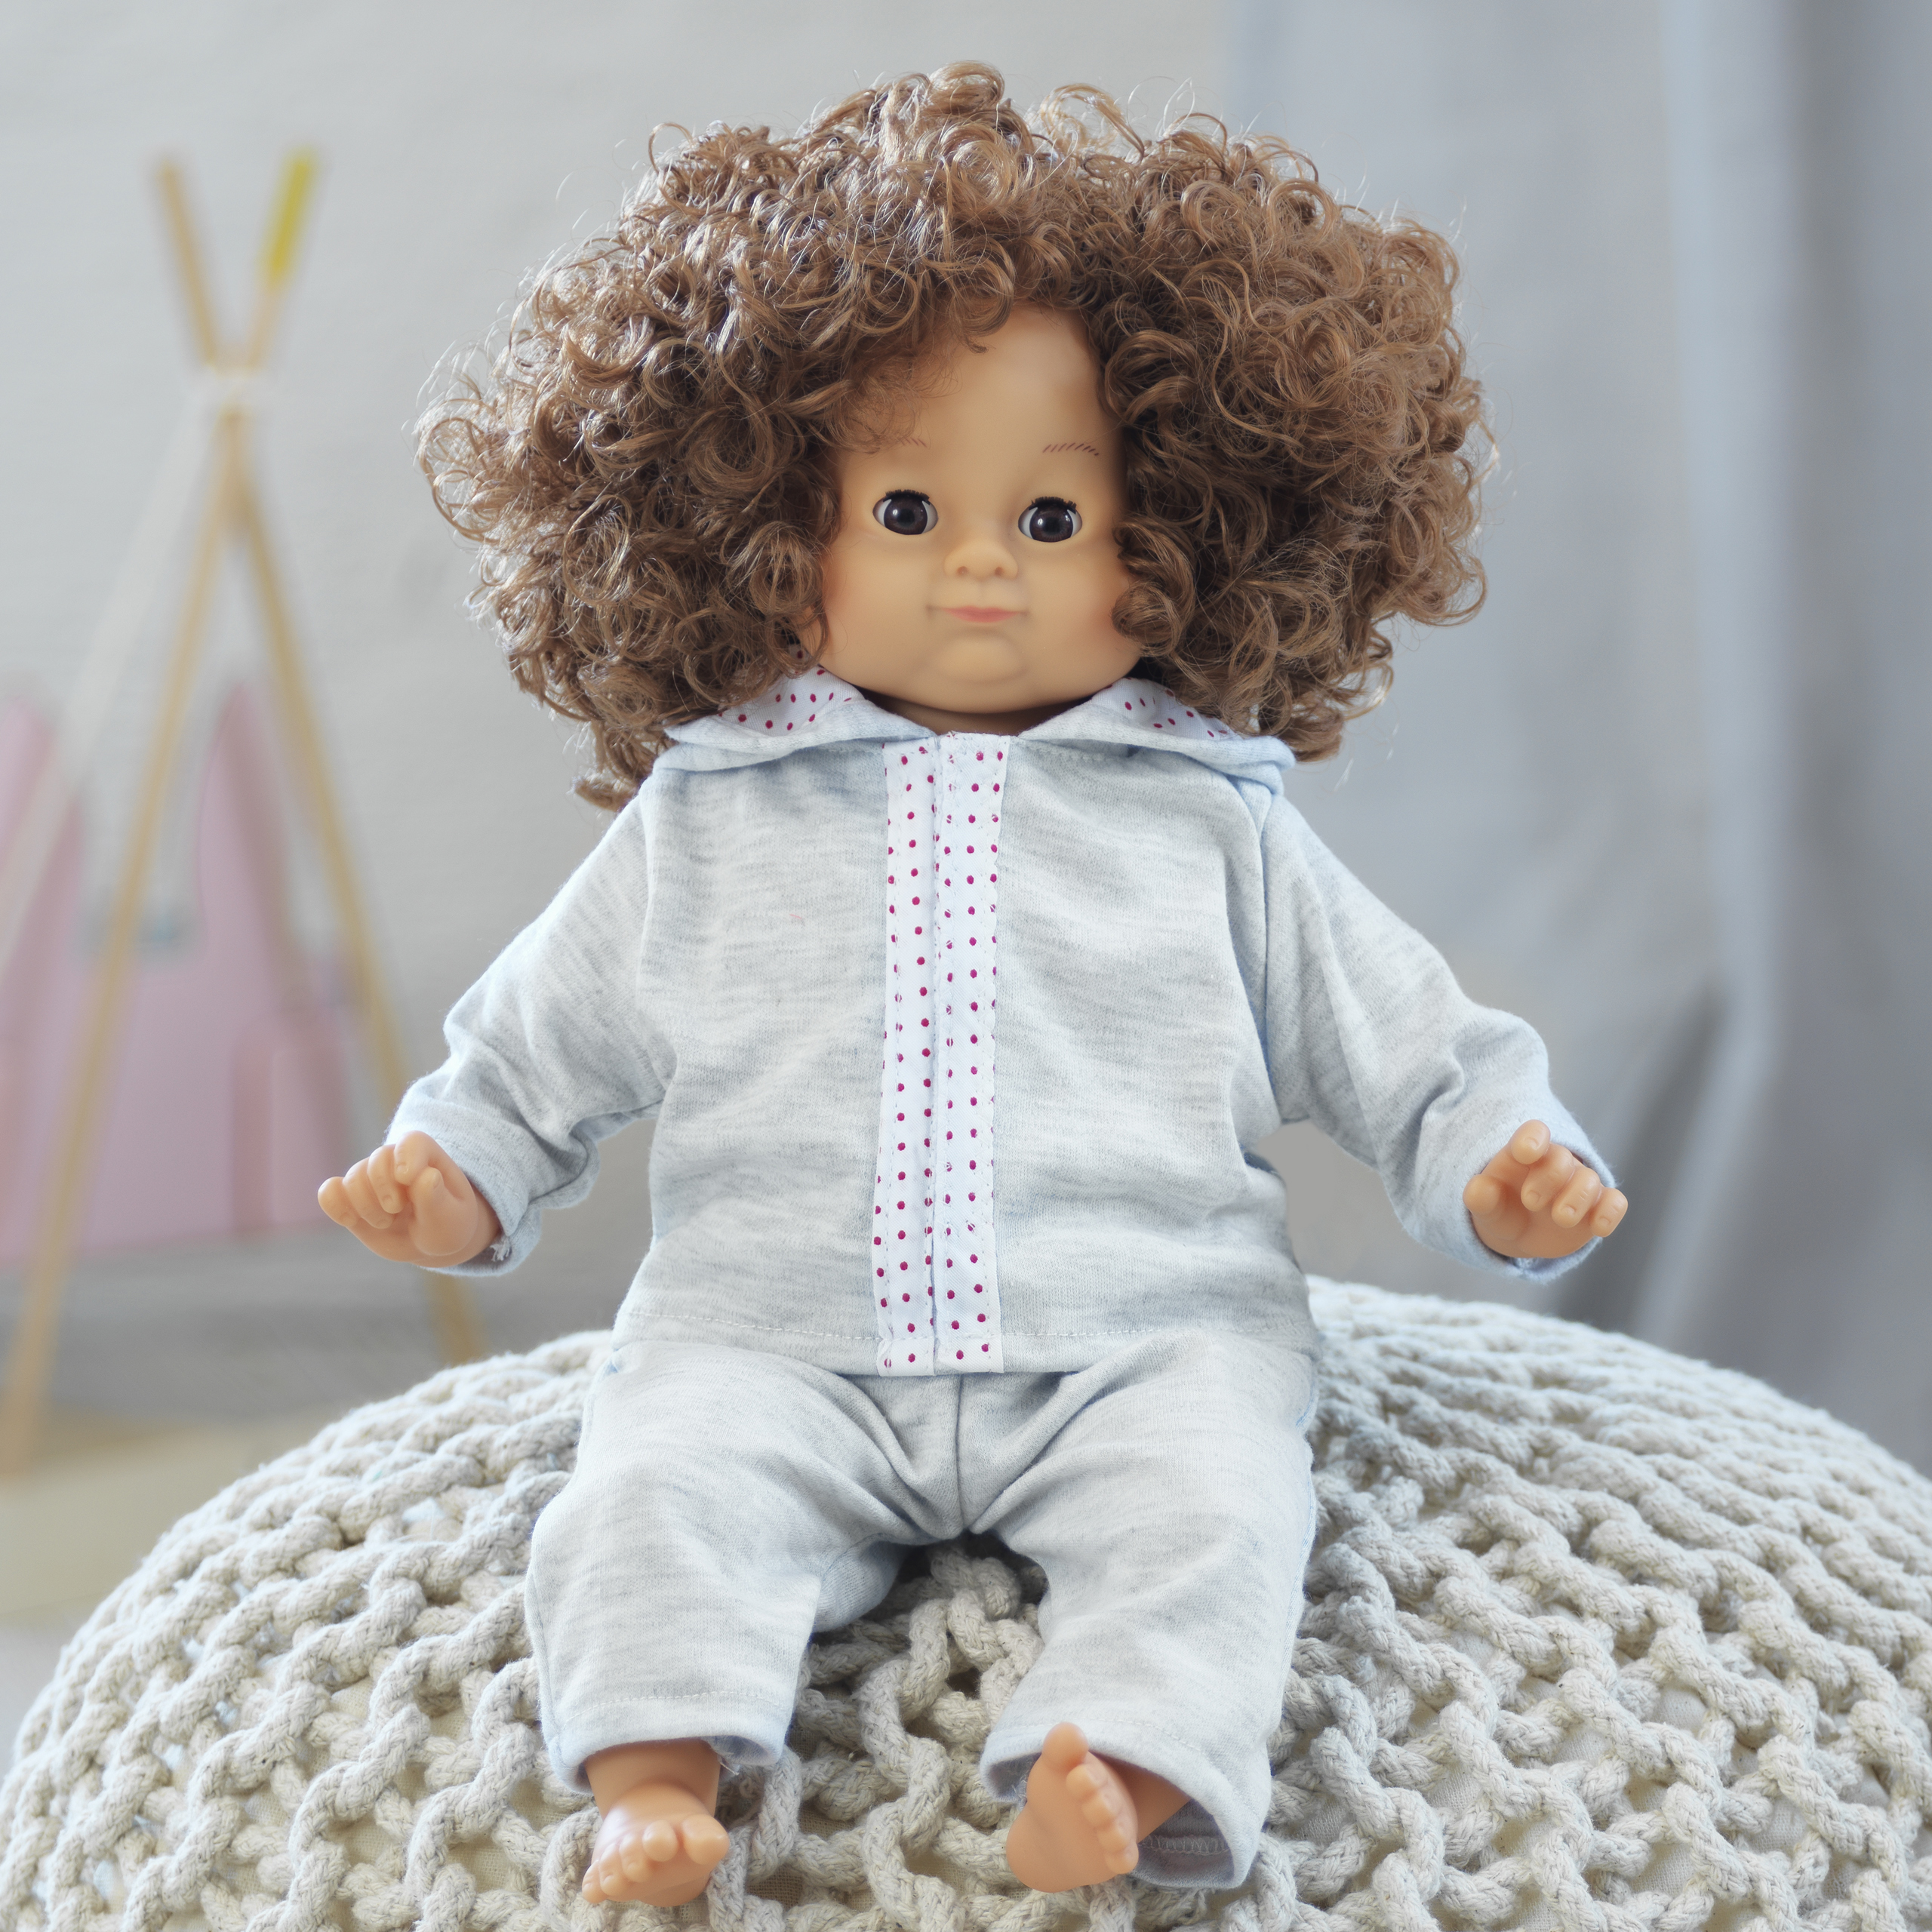 Doll clothes lundby	doll clothes casual dress 36-40 cm